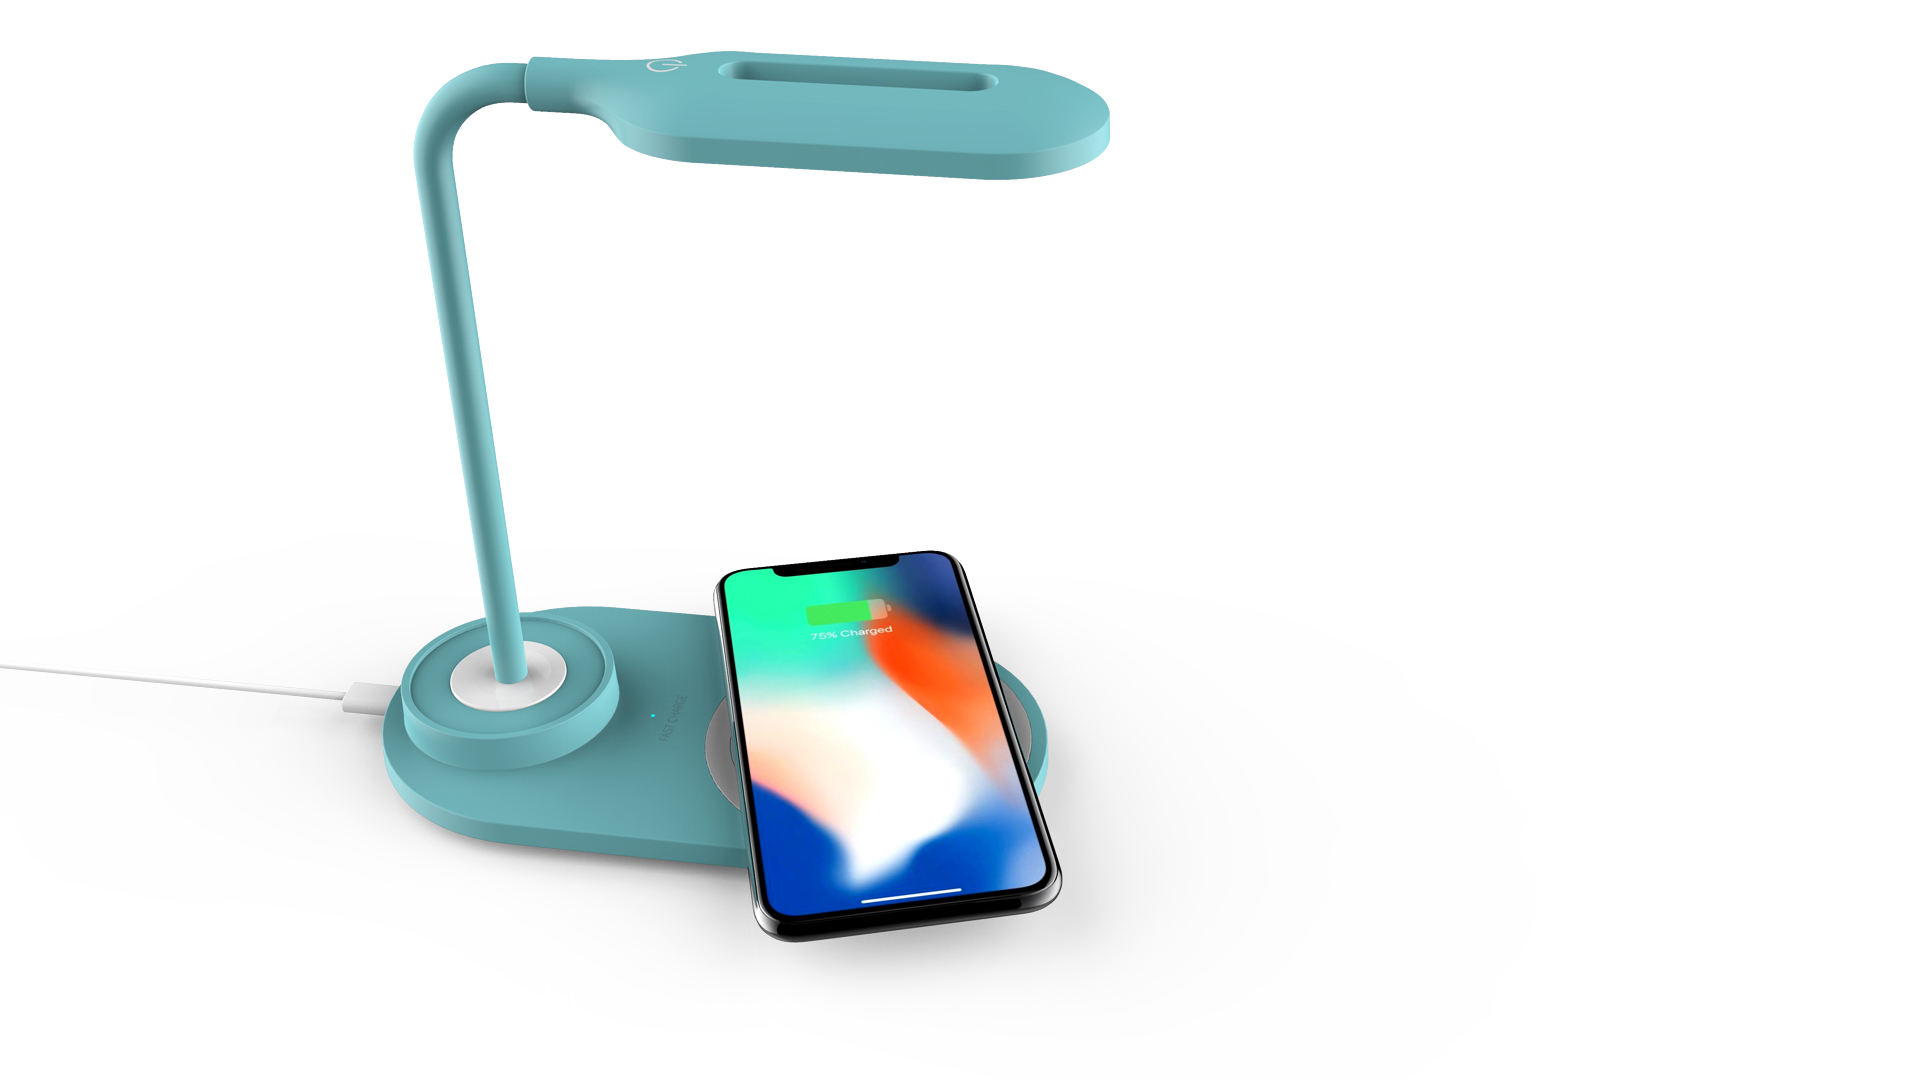 Eye caring desktop touch control LED light lamp with wireless charger